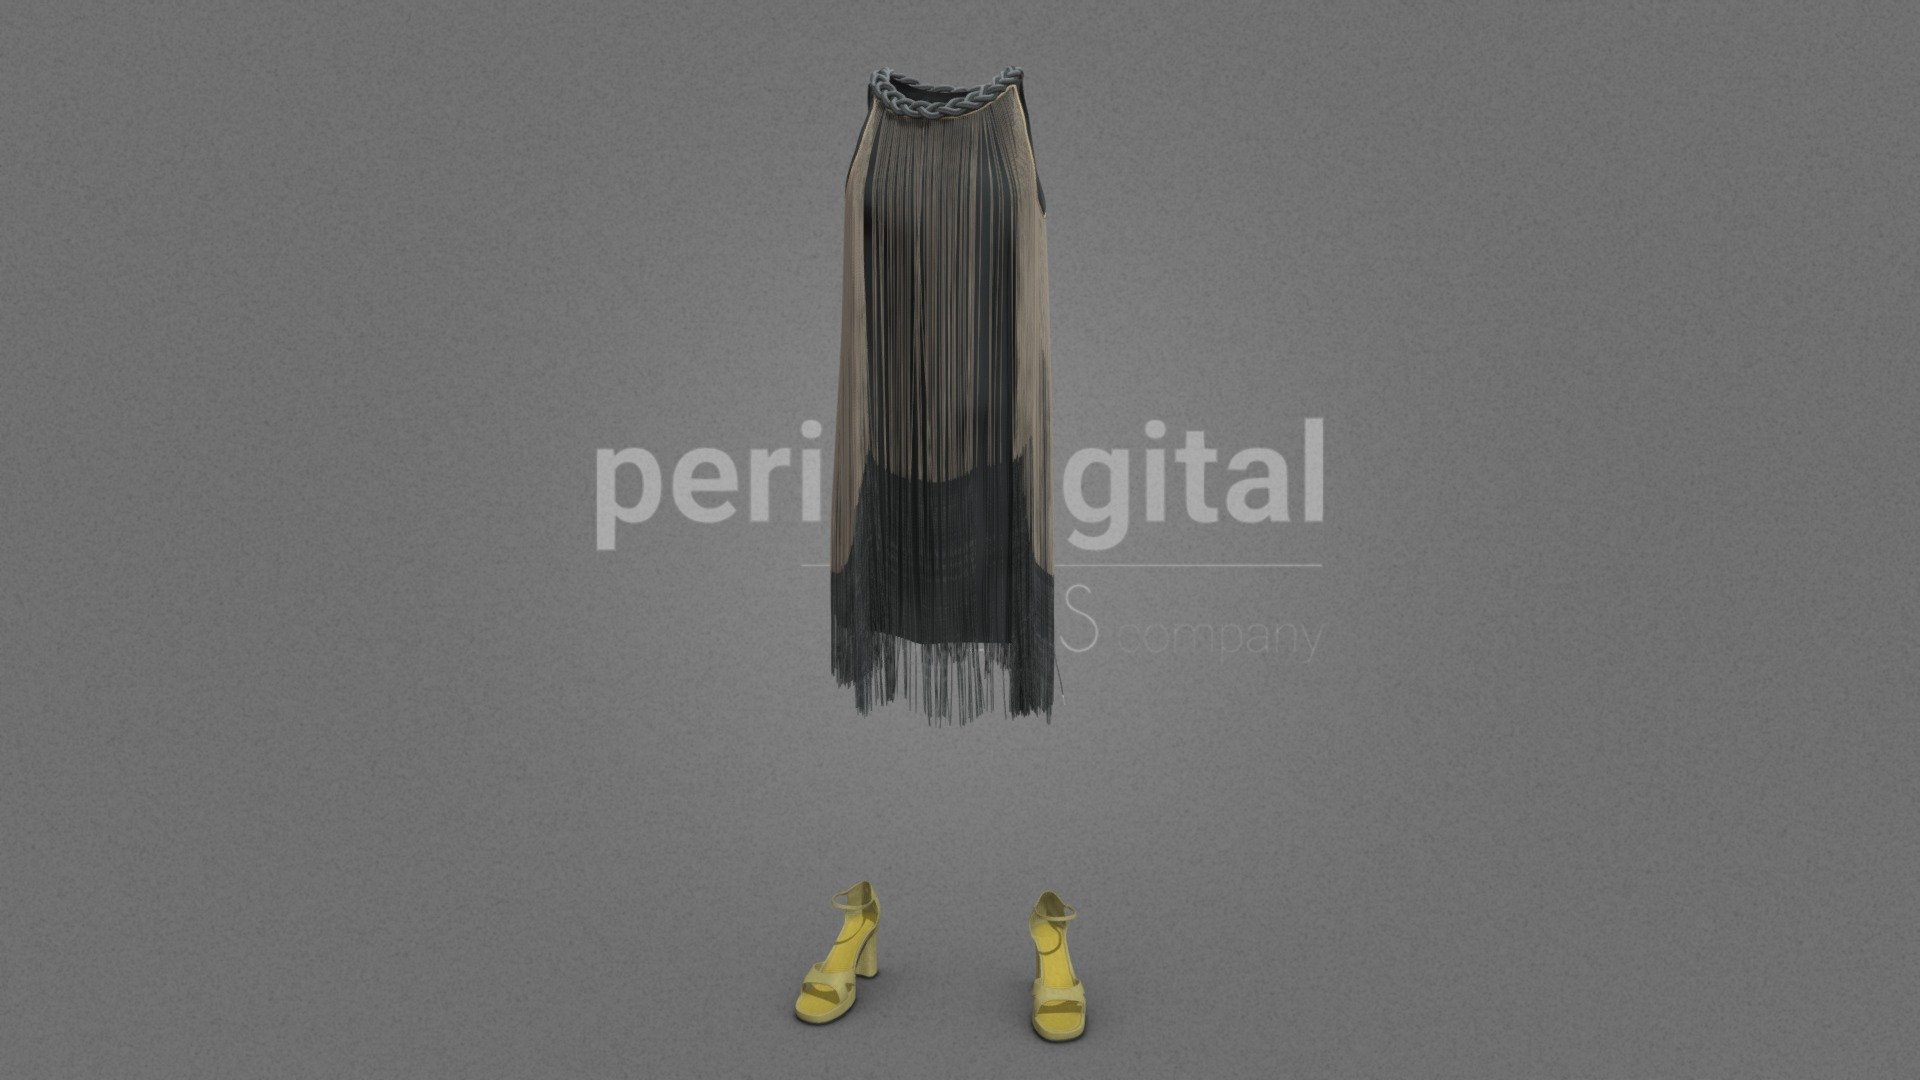 Disco dark dress with long straps from the top with and golden heels

Our “80s” collection consists of several sets, which you can use in your audiovisual creations, extracted and modeled from our catalog of photogrammetry pieces.

They are optimized for use in 3D scenes of medium/high polygonalization and optimized for rendering.

We do not include characters, but they are positioned for you to include and adjust your own character.

They have a model LOW (_LODRIG) inside the Blender file (included in the AdditionalFiles), which you can use for vertex weighting or cloth simulation and thus, make the transfer of vertices or property masks from the LOW to the HIGH** model.

**We have included the texture maps in high resolution, so you can make extreme point of view with your 3D cameras, as well as the Blender file so you can edit any aspect of the set.

Enjoy it.

Web: https://peris.digital/ - 80s Series - Disco Dress - 3D model by Peris Digital (@perisdigital) 3d model